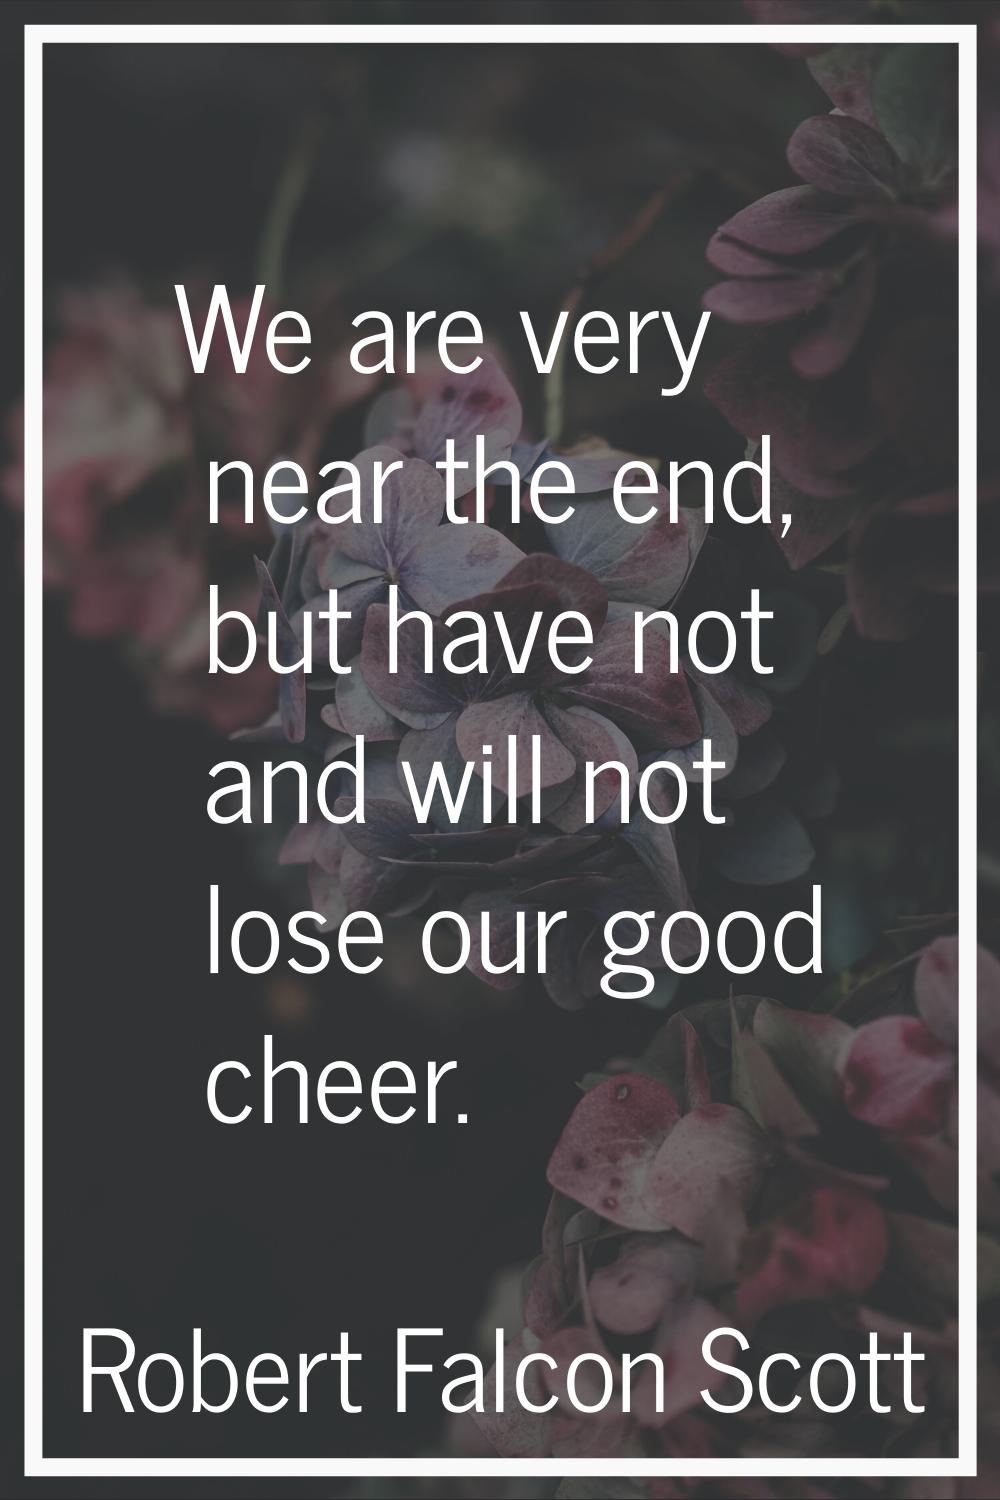 We are very near the end, but have not and will not lose our good cheer.